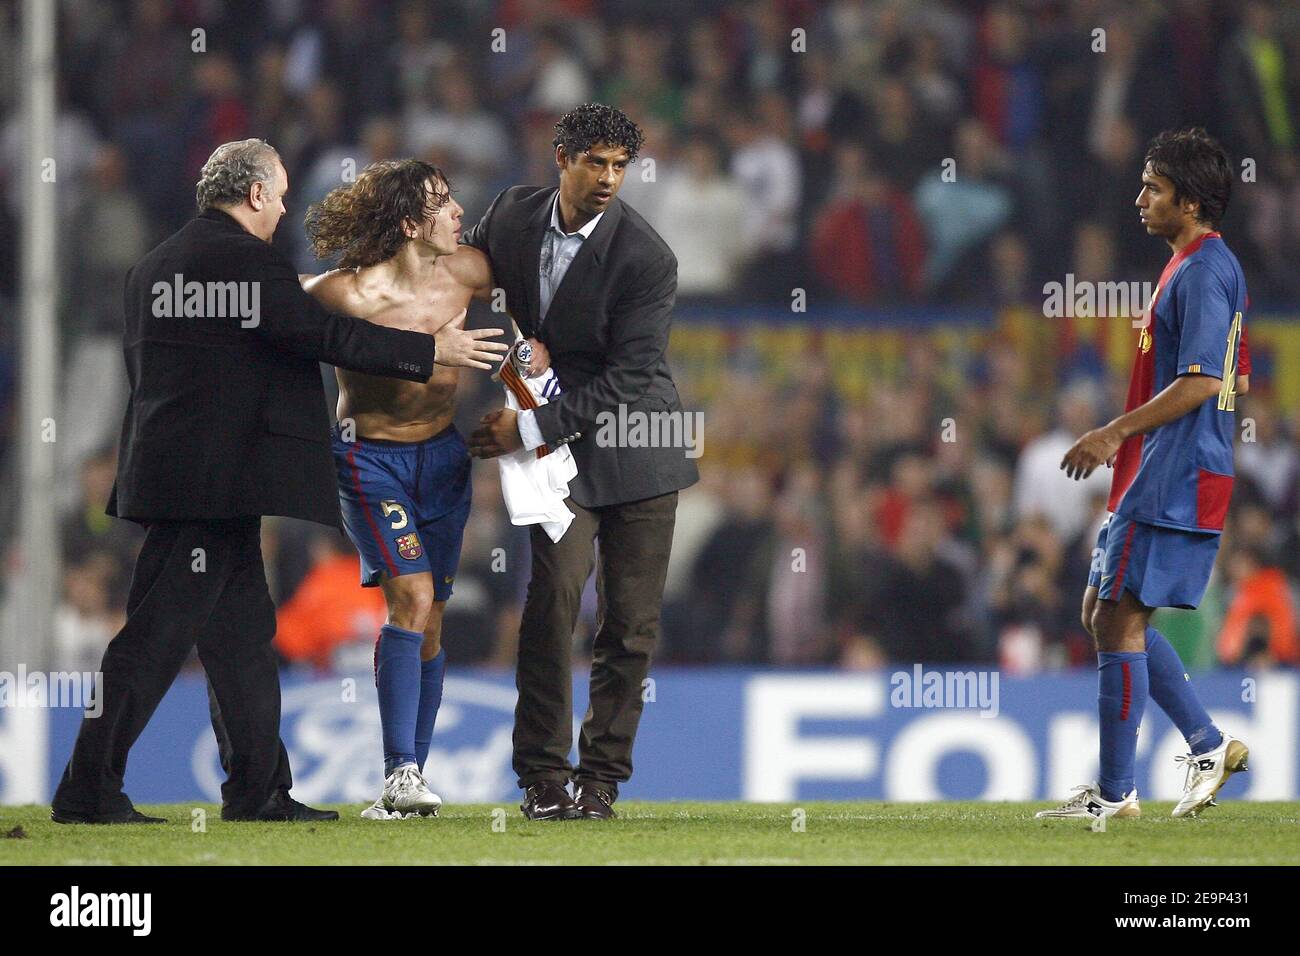 Barcelona's coach Frank Rijkaard and Carles Puyol during the UEFA Champions League, Group A, Barcelona vs Chelsea at the Camp Nou stadium in Barcelona, Spain on October 31, 2006. The match ended in a 2-2 draw. Photo by Christian Liewig/ABACAPRESS.COM Stock Photo